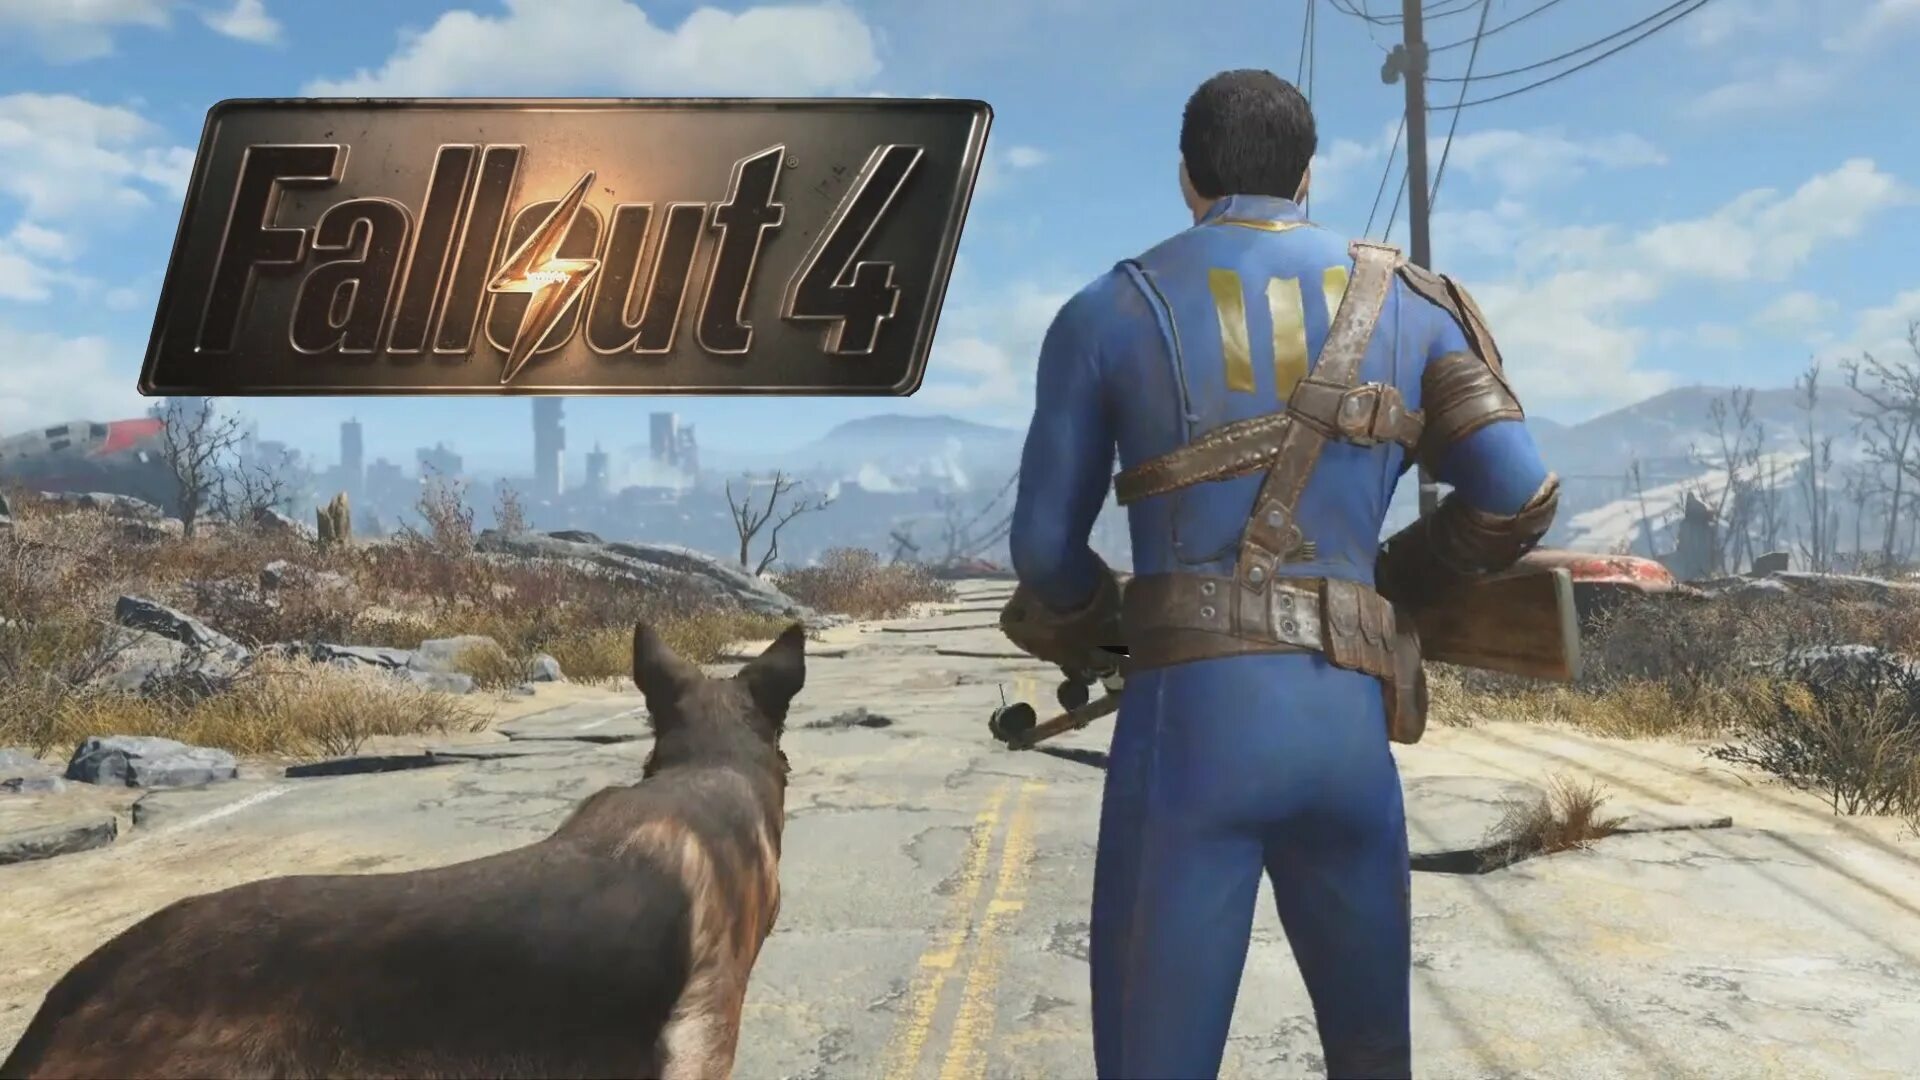 Fallout 4 последняя версия 2022. Фоллаут 4 геймплей. Fallout 4 ps4 Gameplay. Fallout 4 трейлер. Норт энд фоллаут 4.